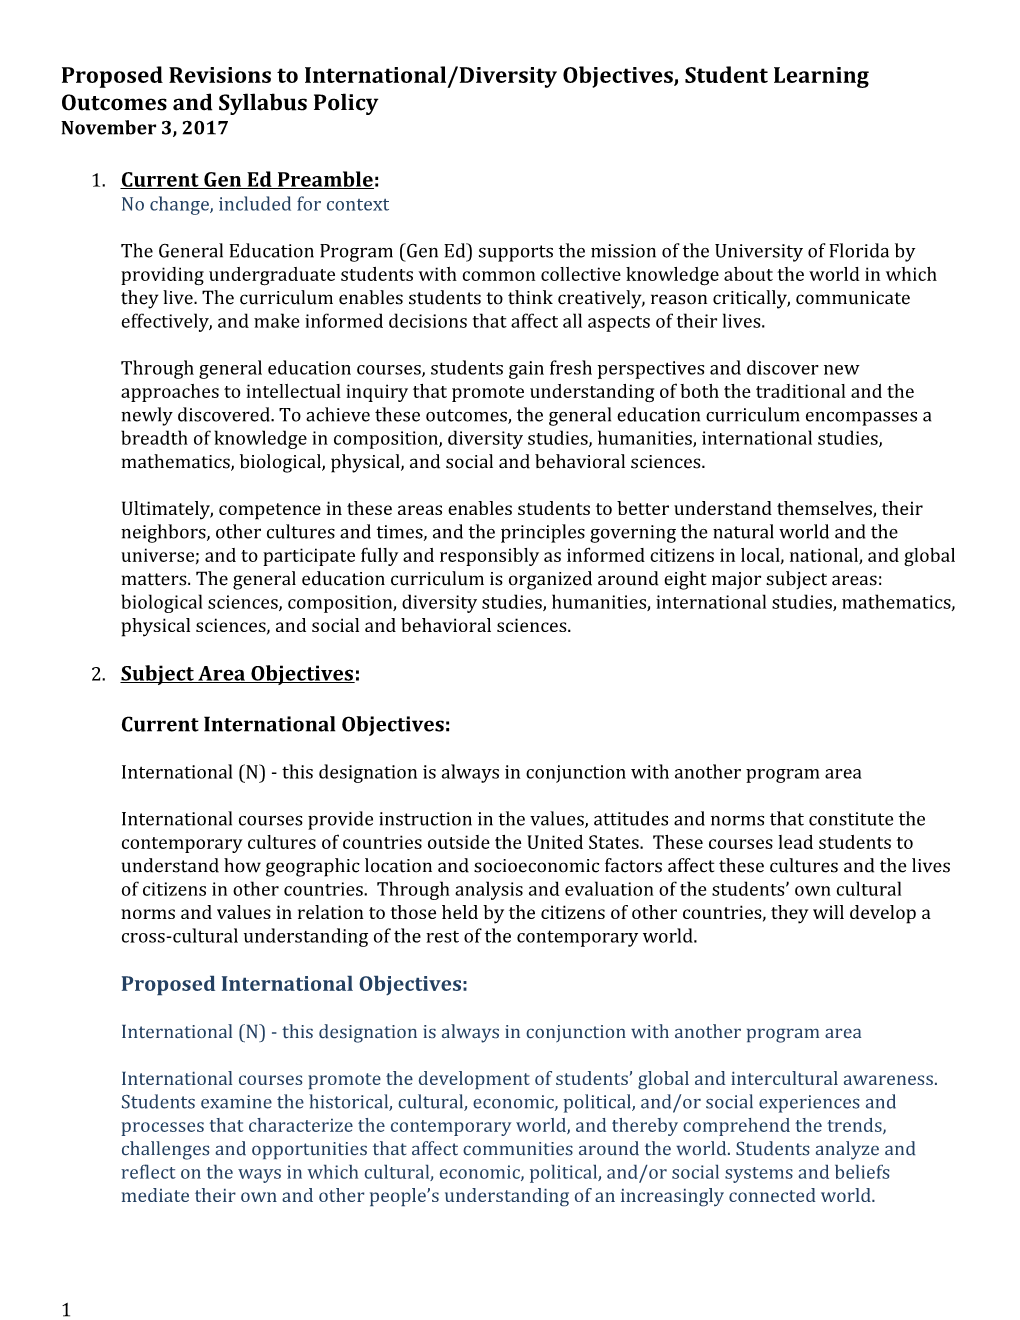 Proposed Revisions to International/Diversity Objectives, Student Learning Outcomes And